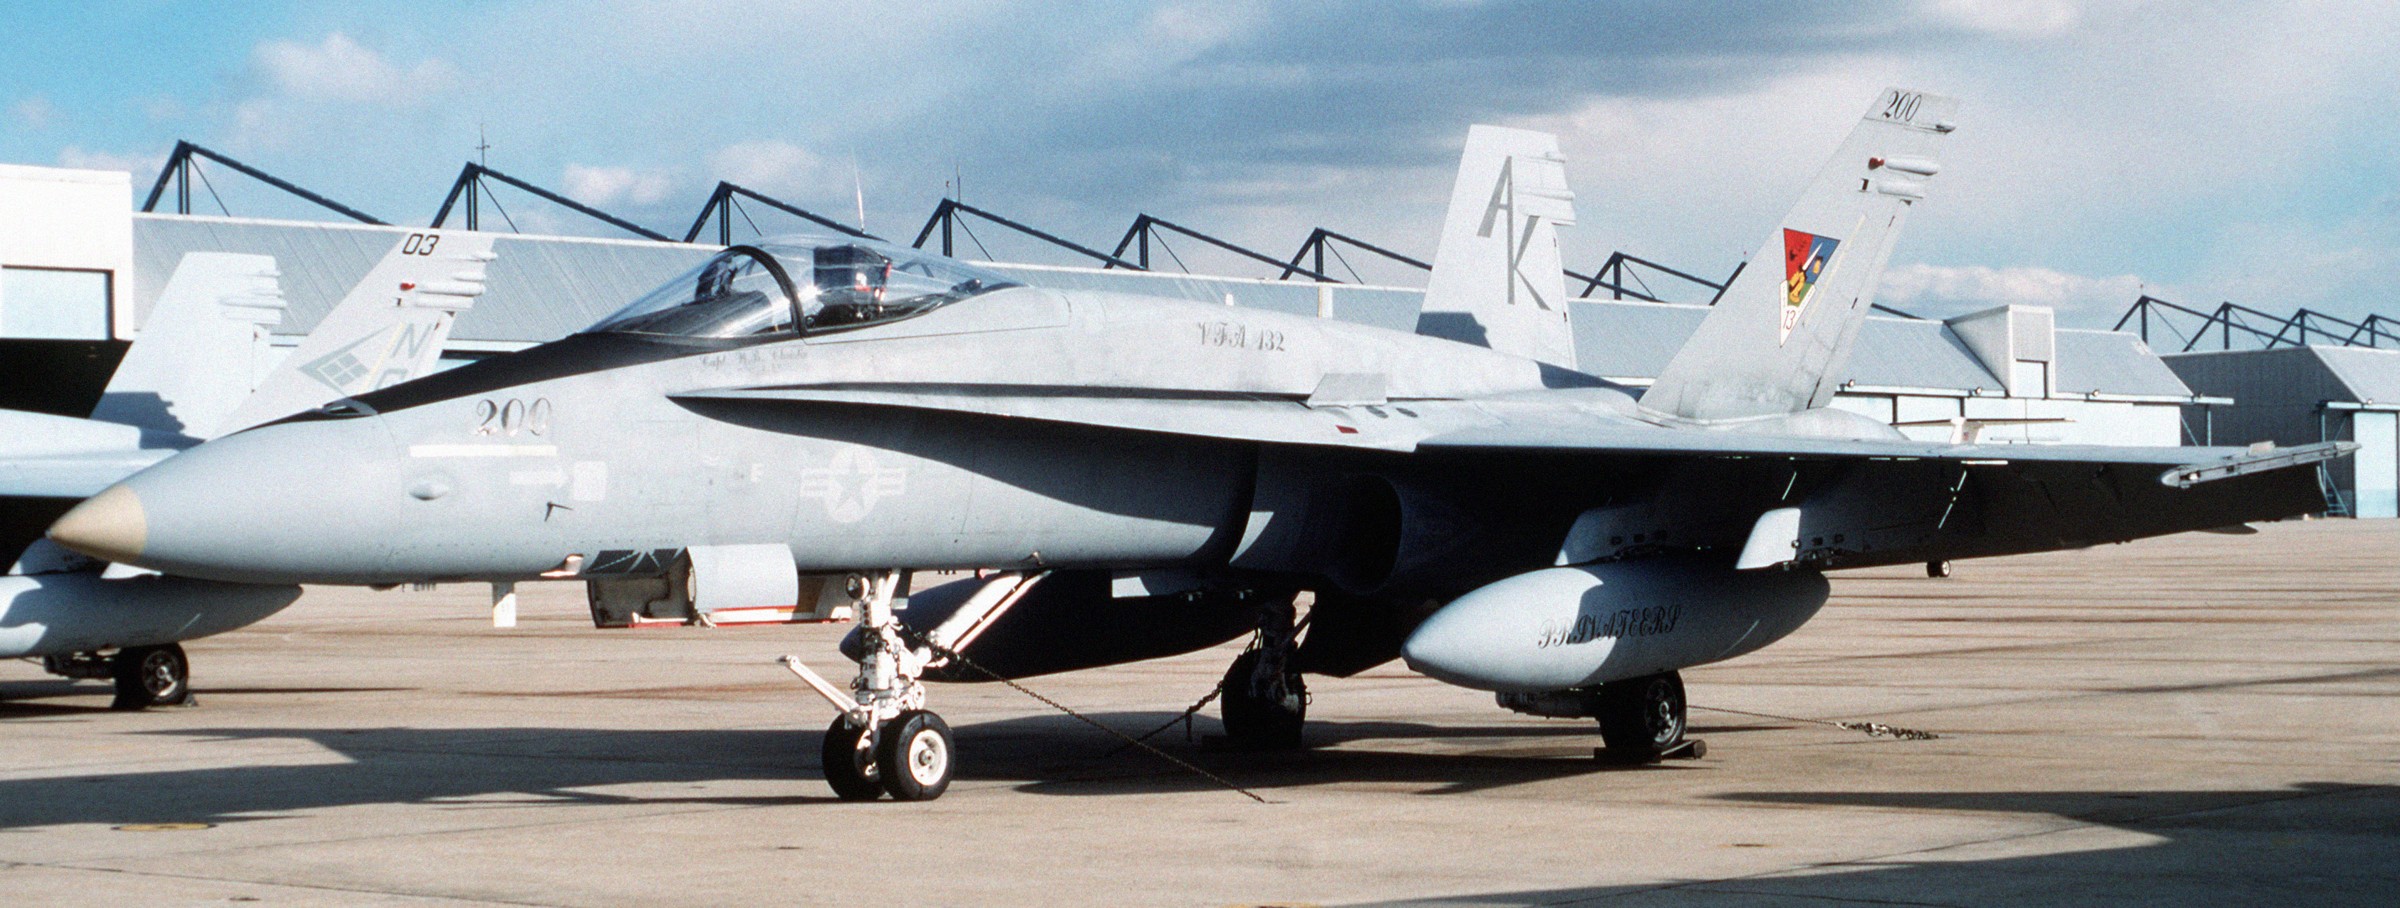 vfa-132 privateers strike fighter squadron f/a-18a hornet cvw-13nas cecil field florida 1990 04